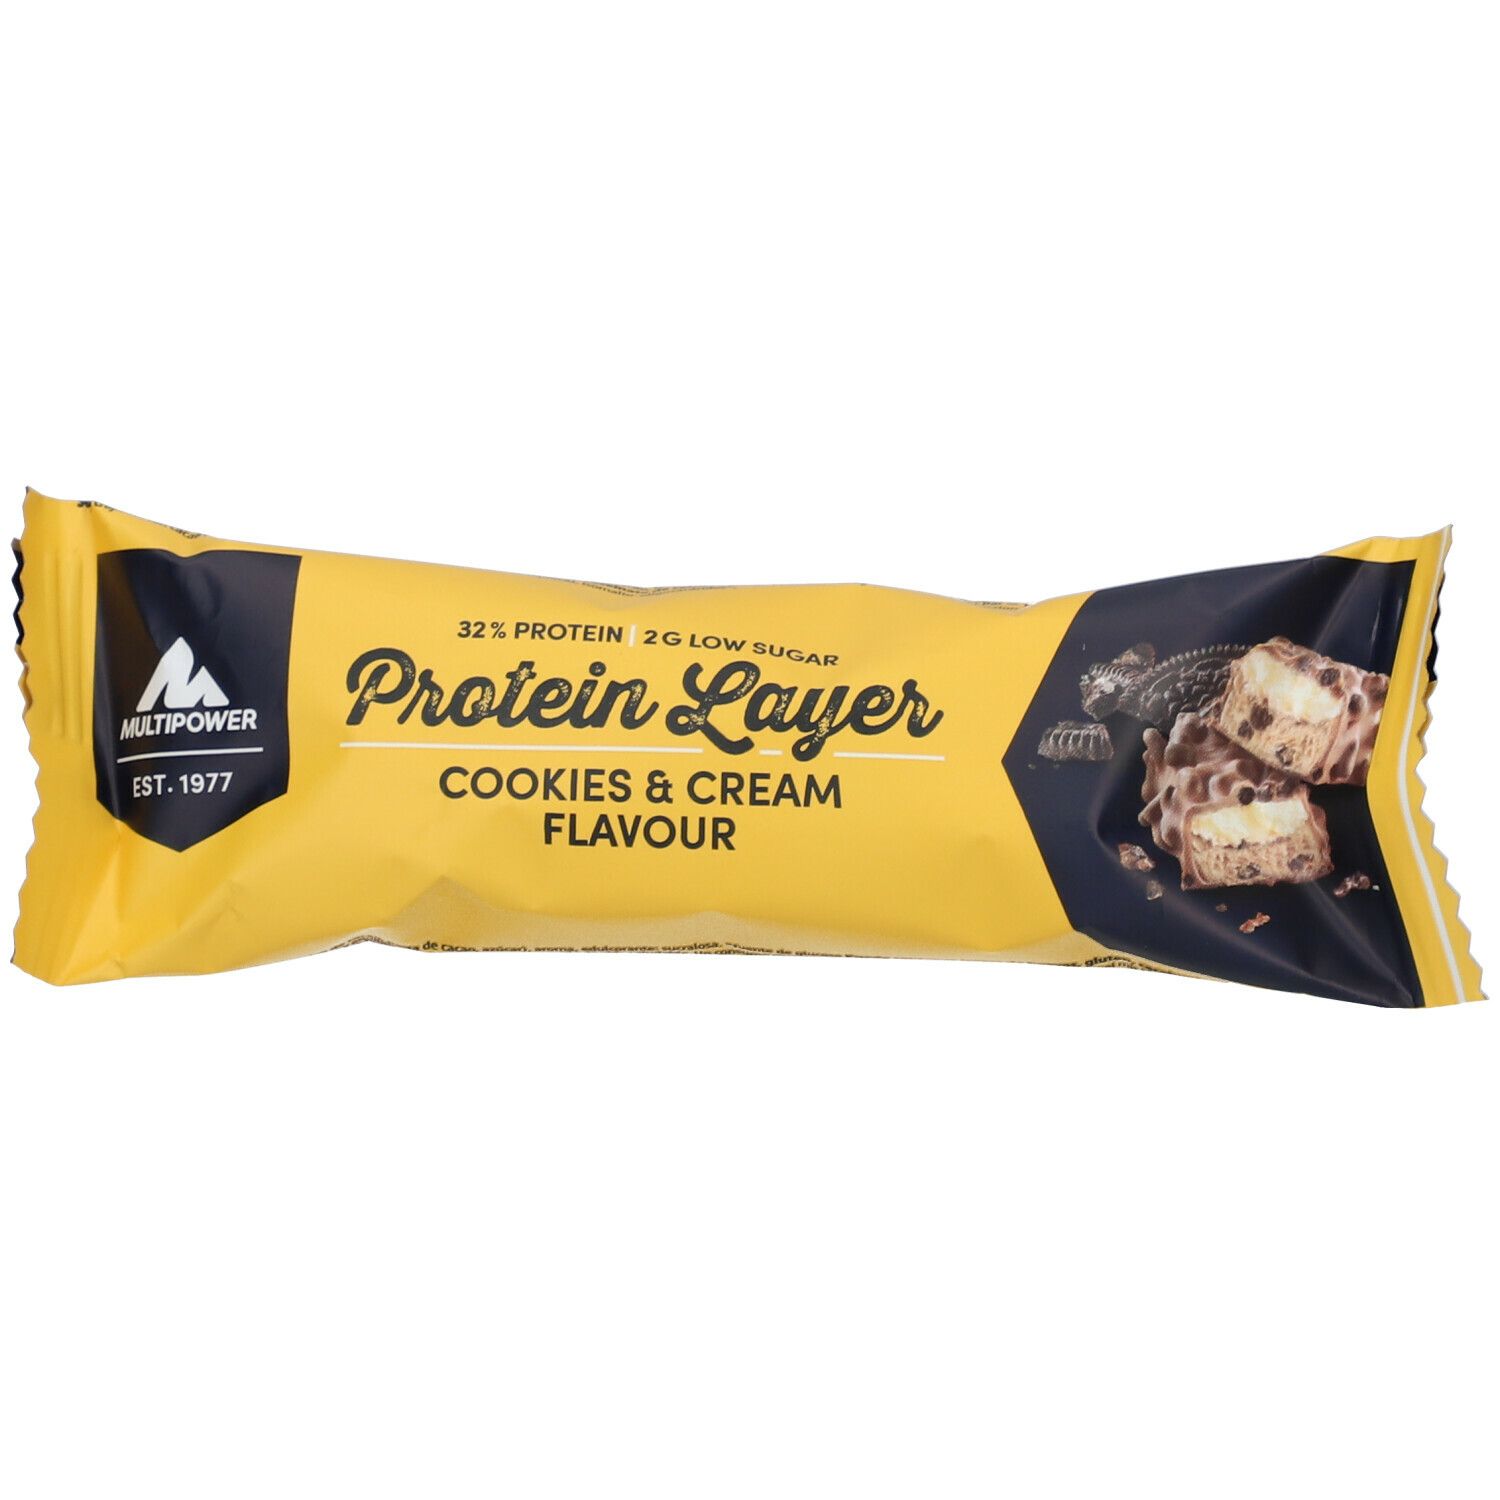 Multipower Protein Layer, Cookies & Cream